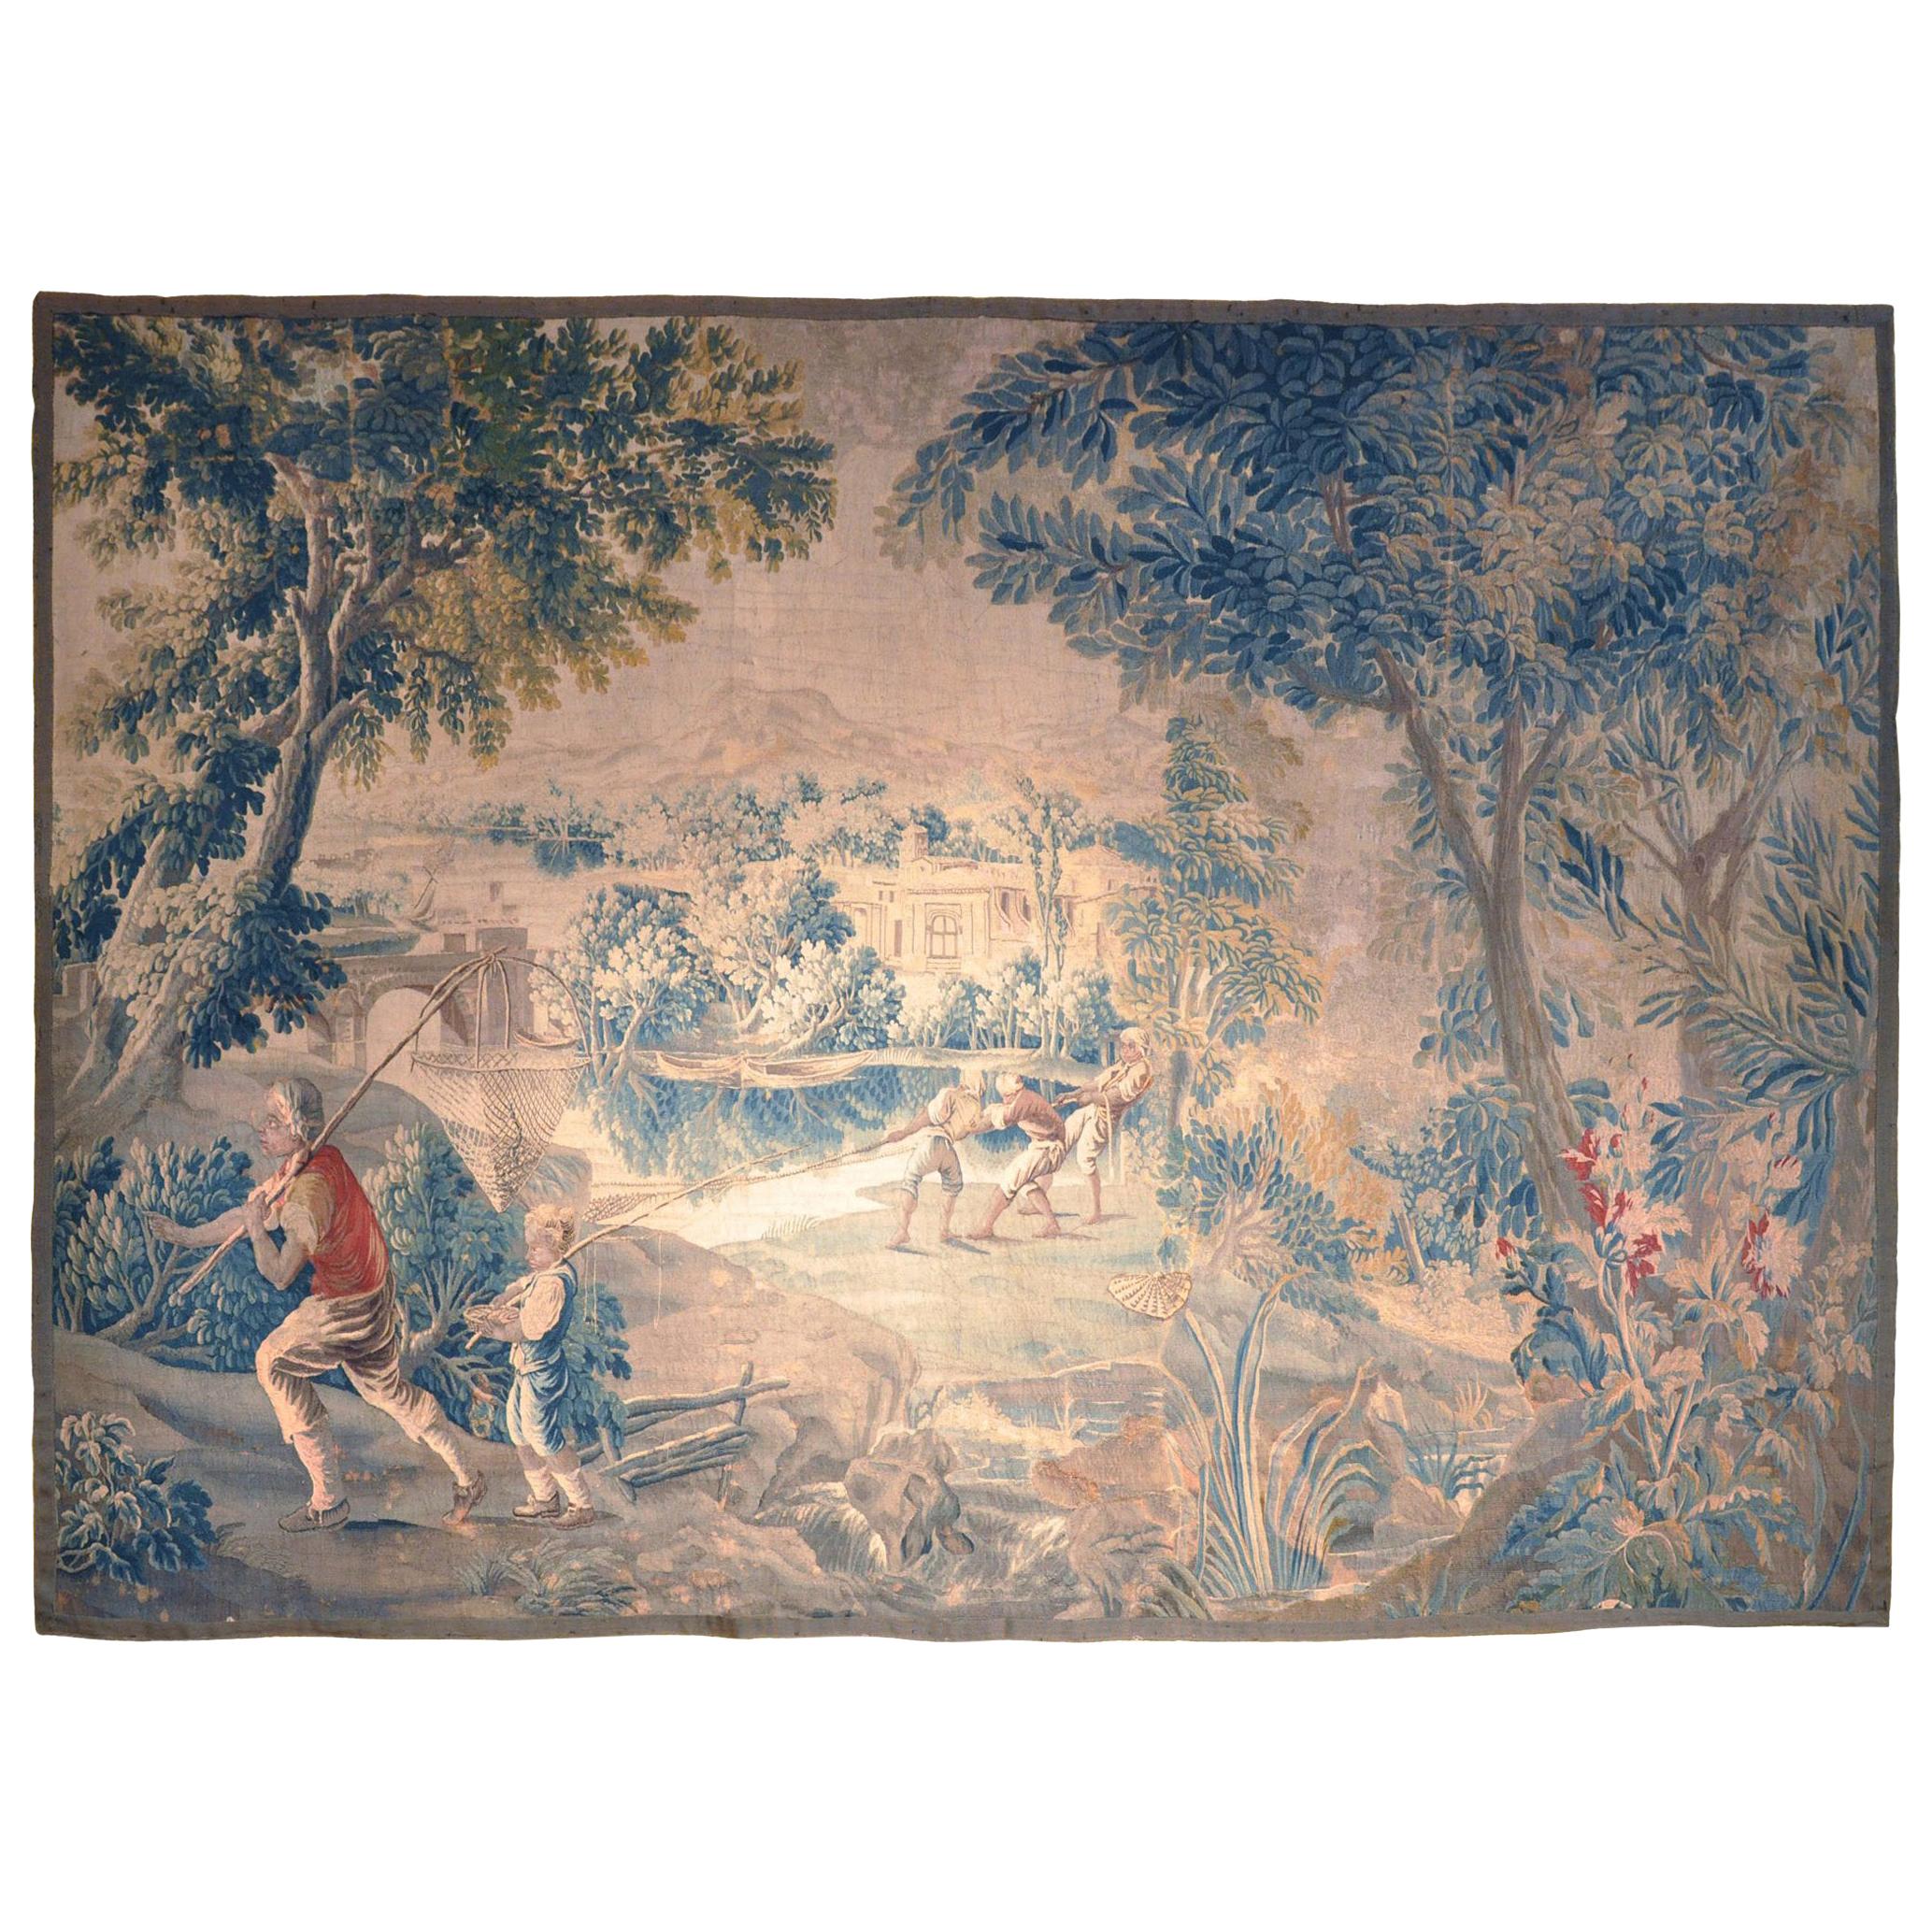 18th Century French Handwoven Aubusson Verdure Tapestry with Fishermen